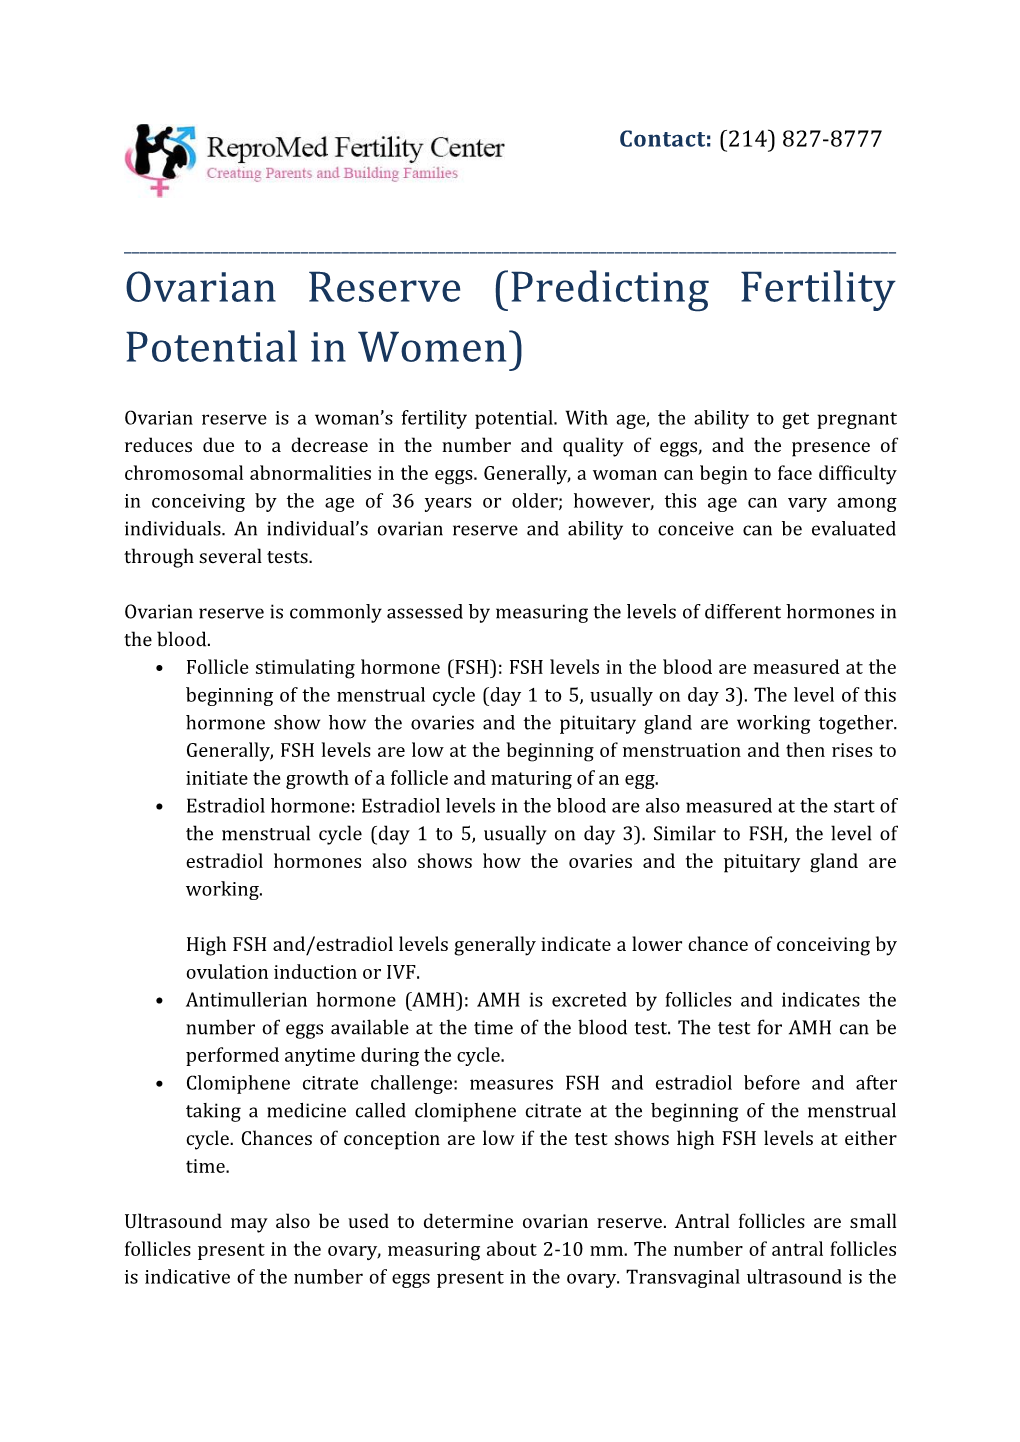 Ovarian Reserve (Predicting Fertility Potential in Women)